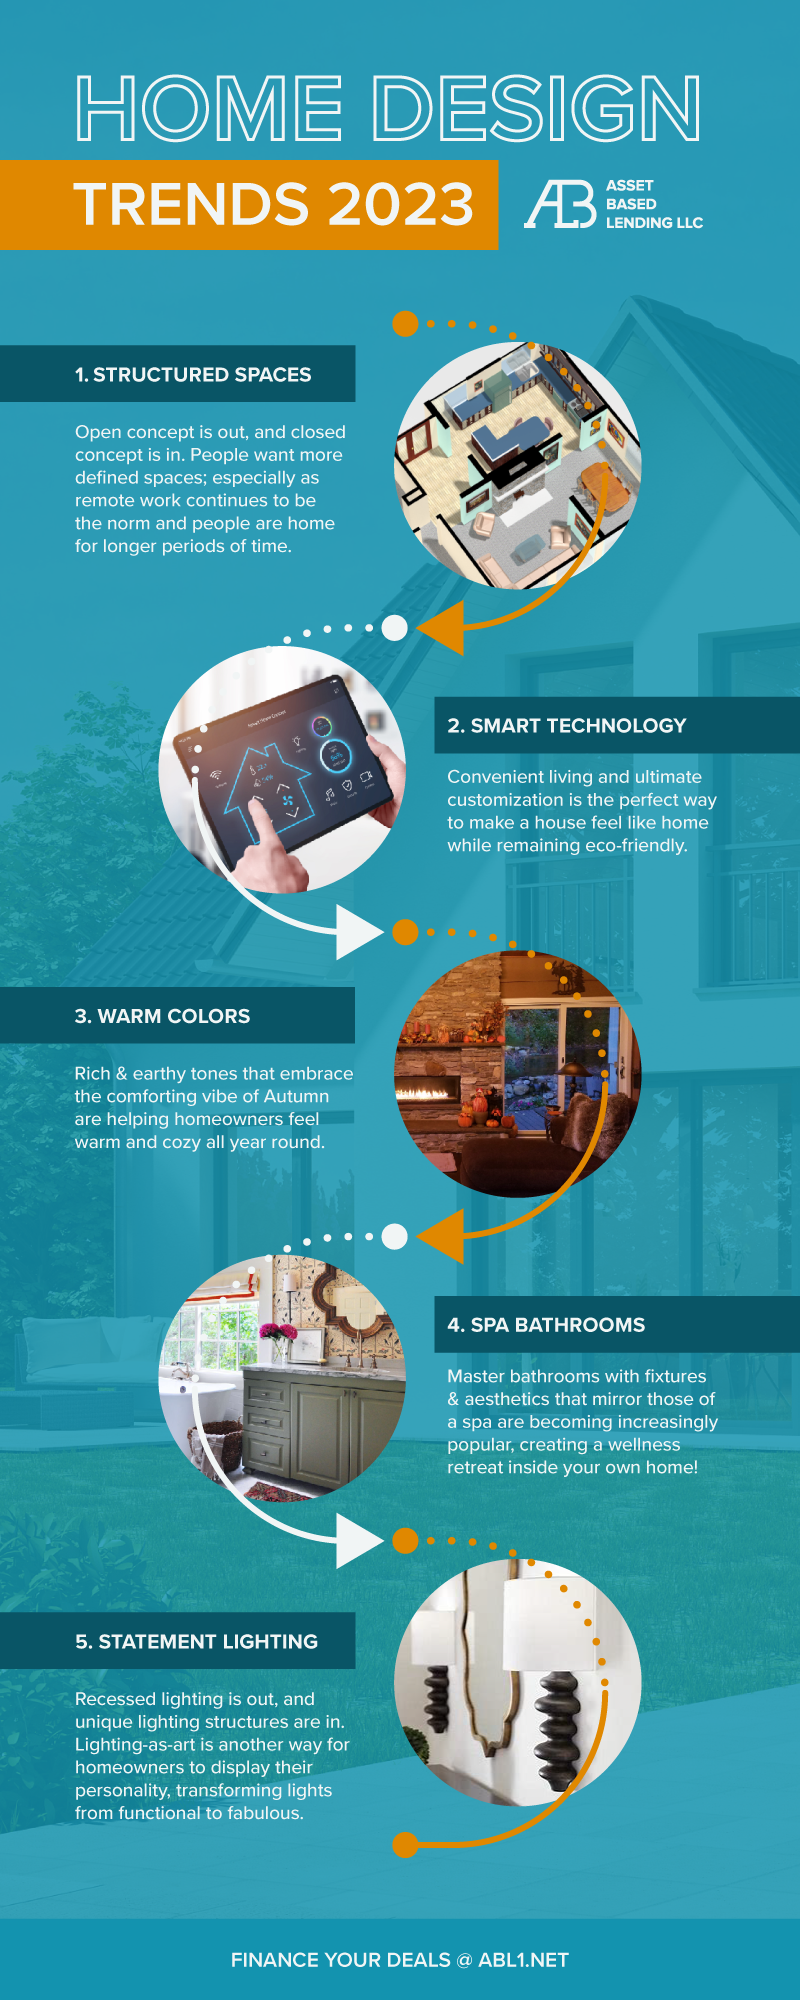 Top 5 home design trends for 2023